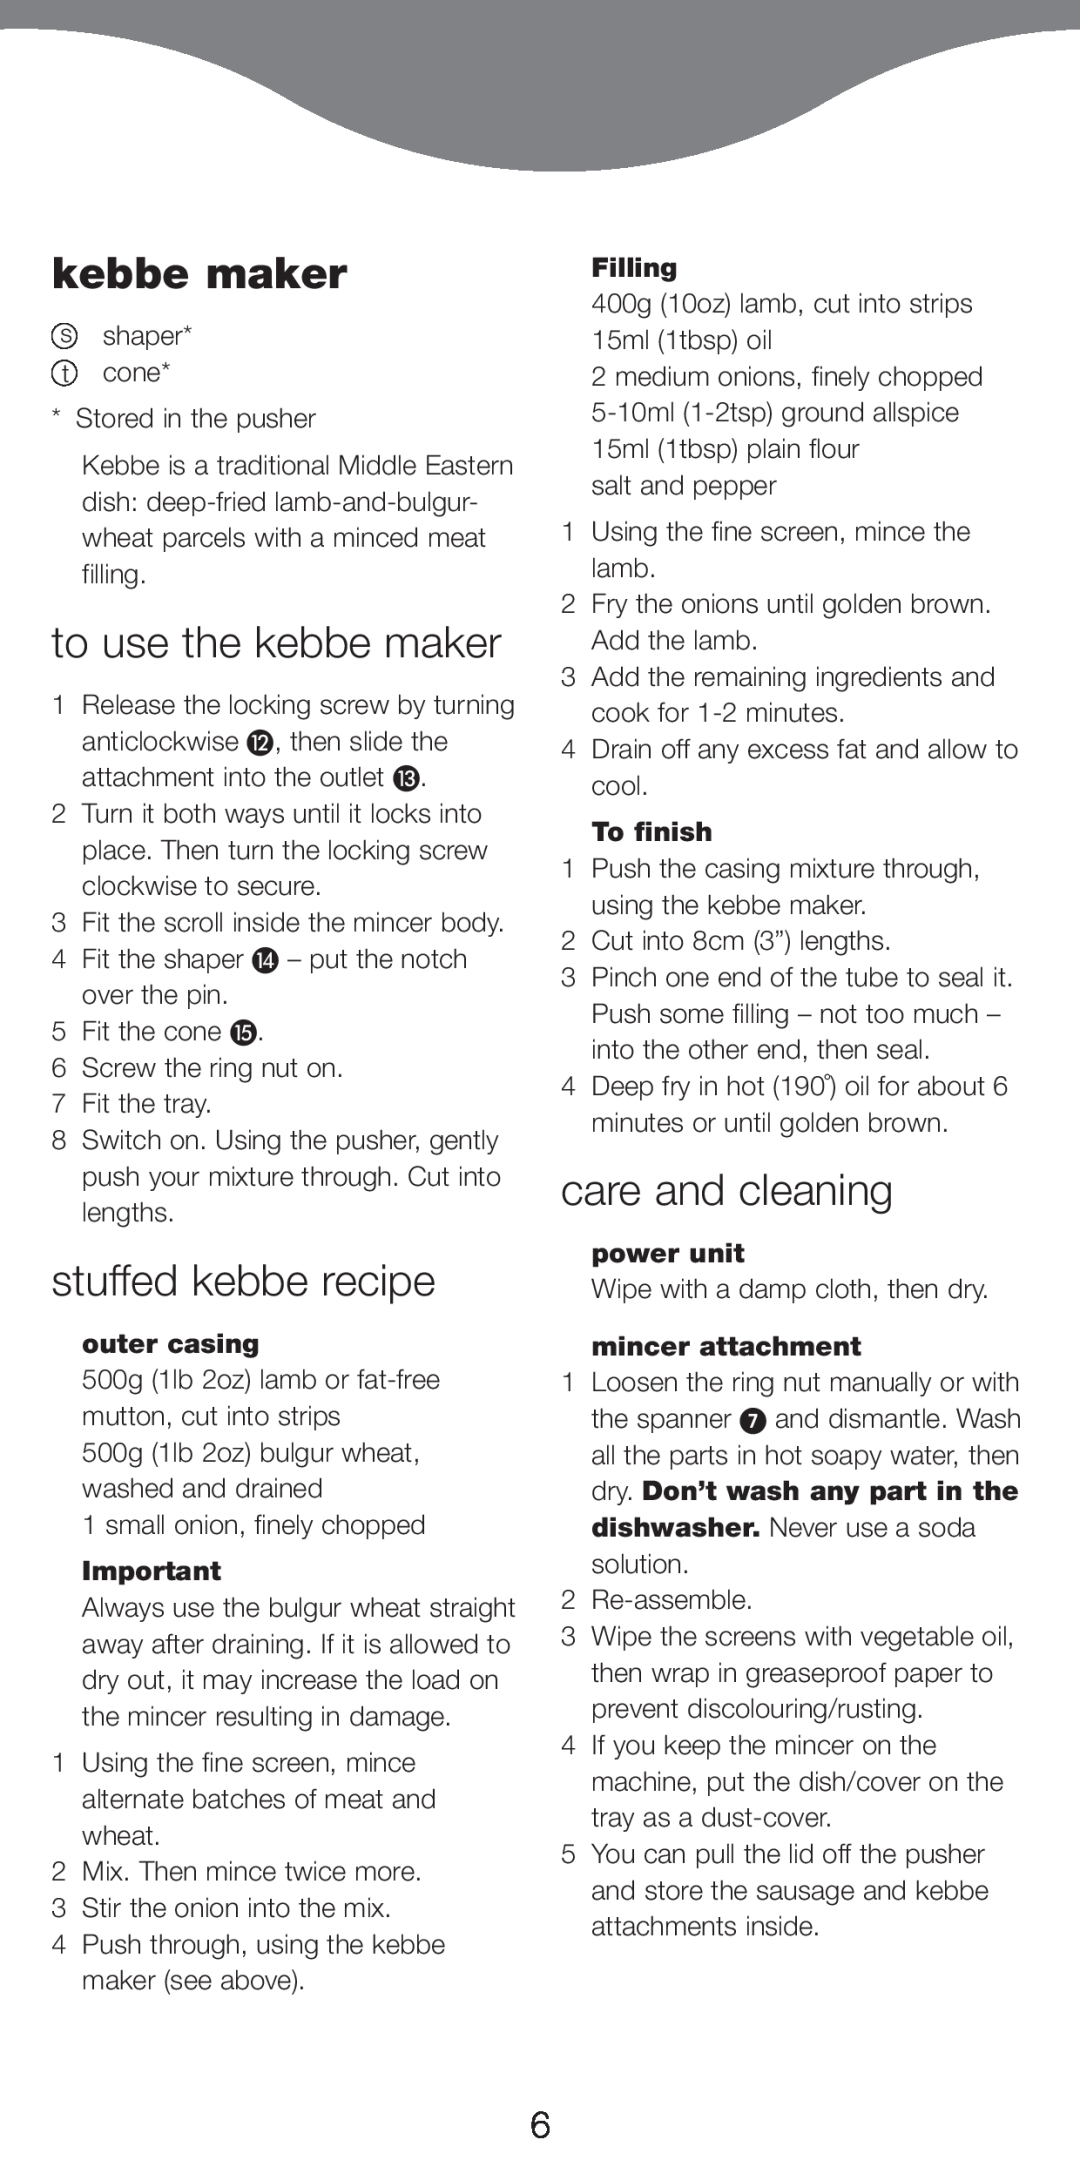 Kenwood MG510 manual to use the kebbe maker, stuffed kebbe recipe, care and cleaning, outer casing, Filling, To finish 